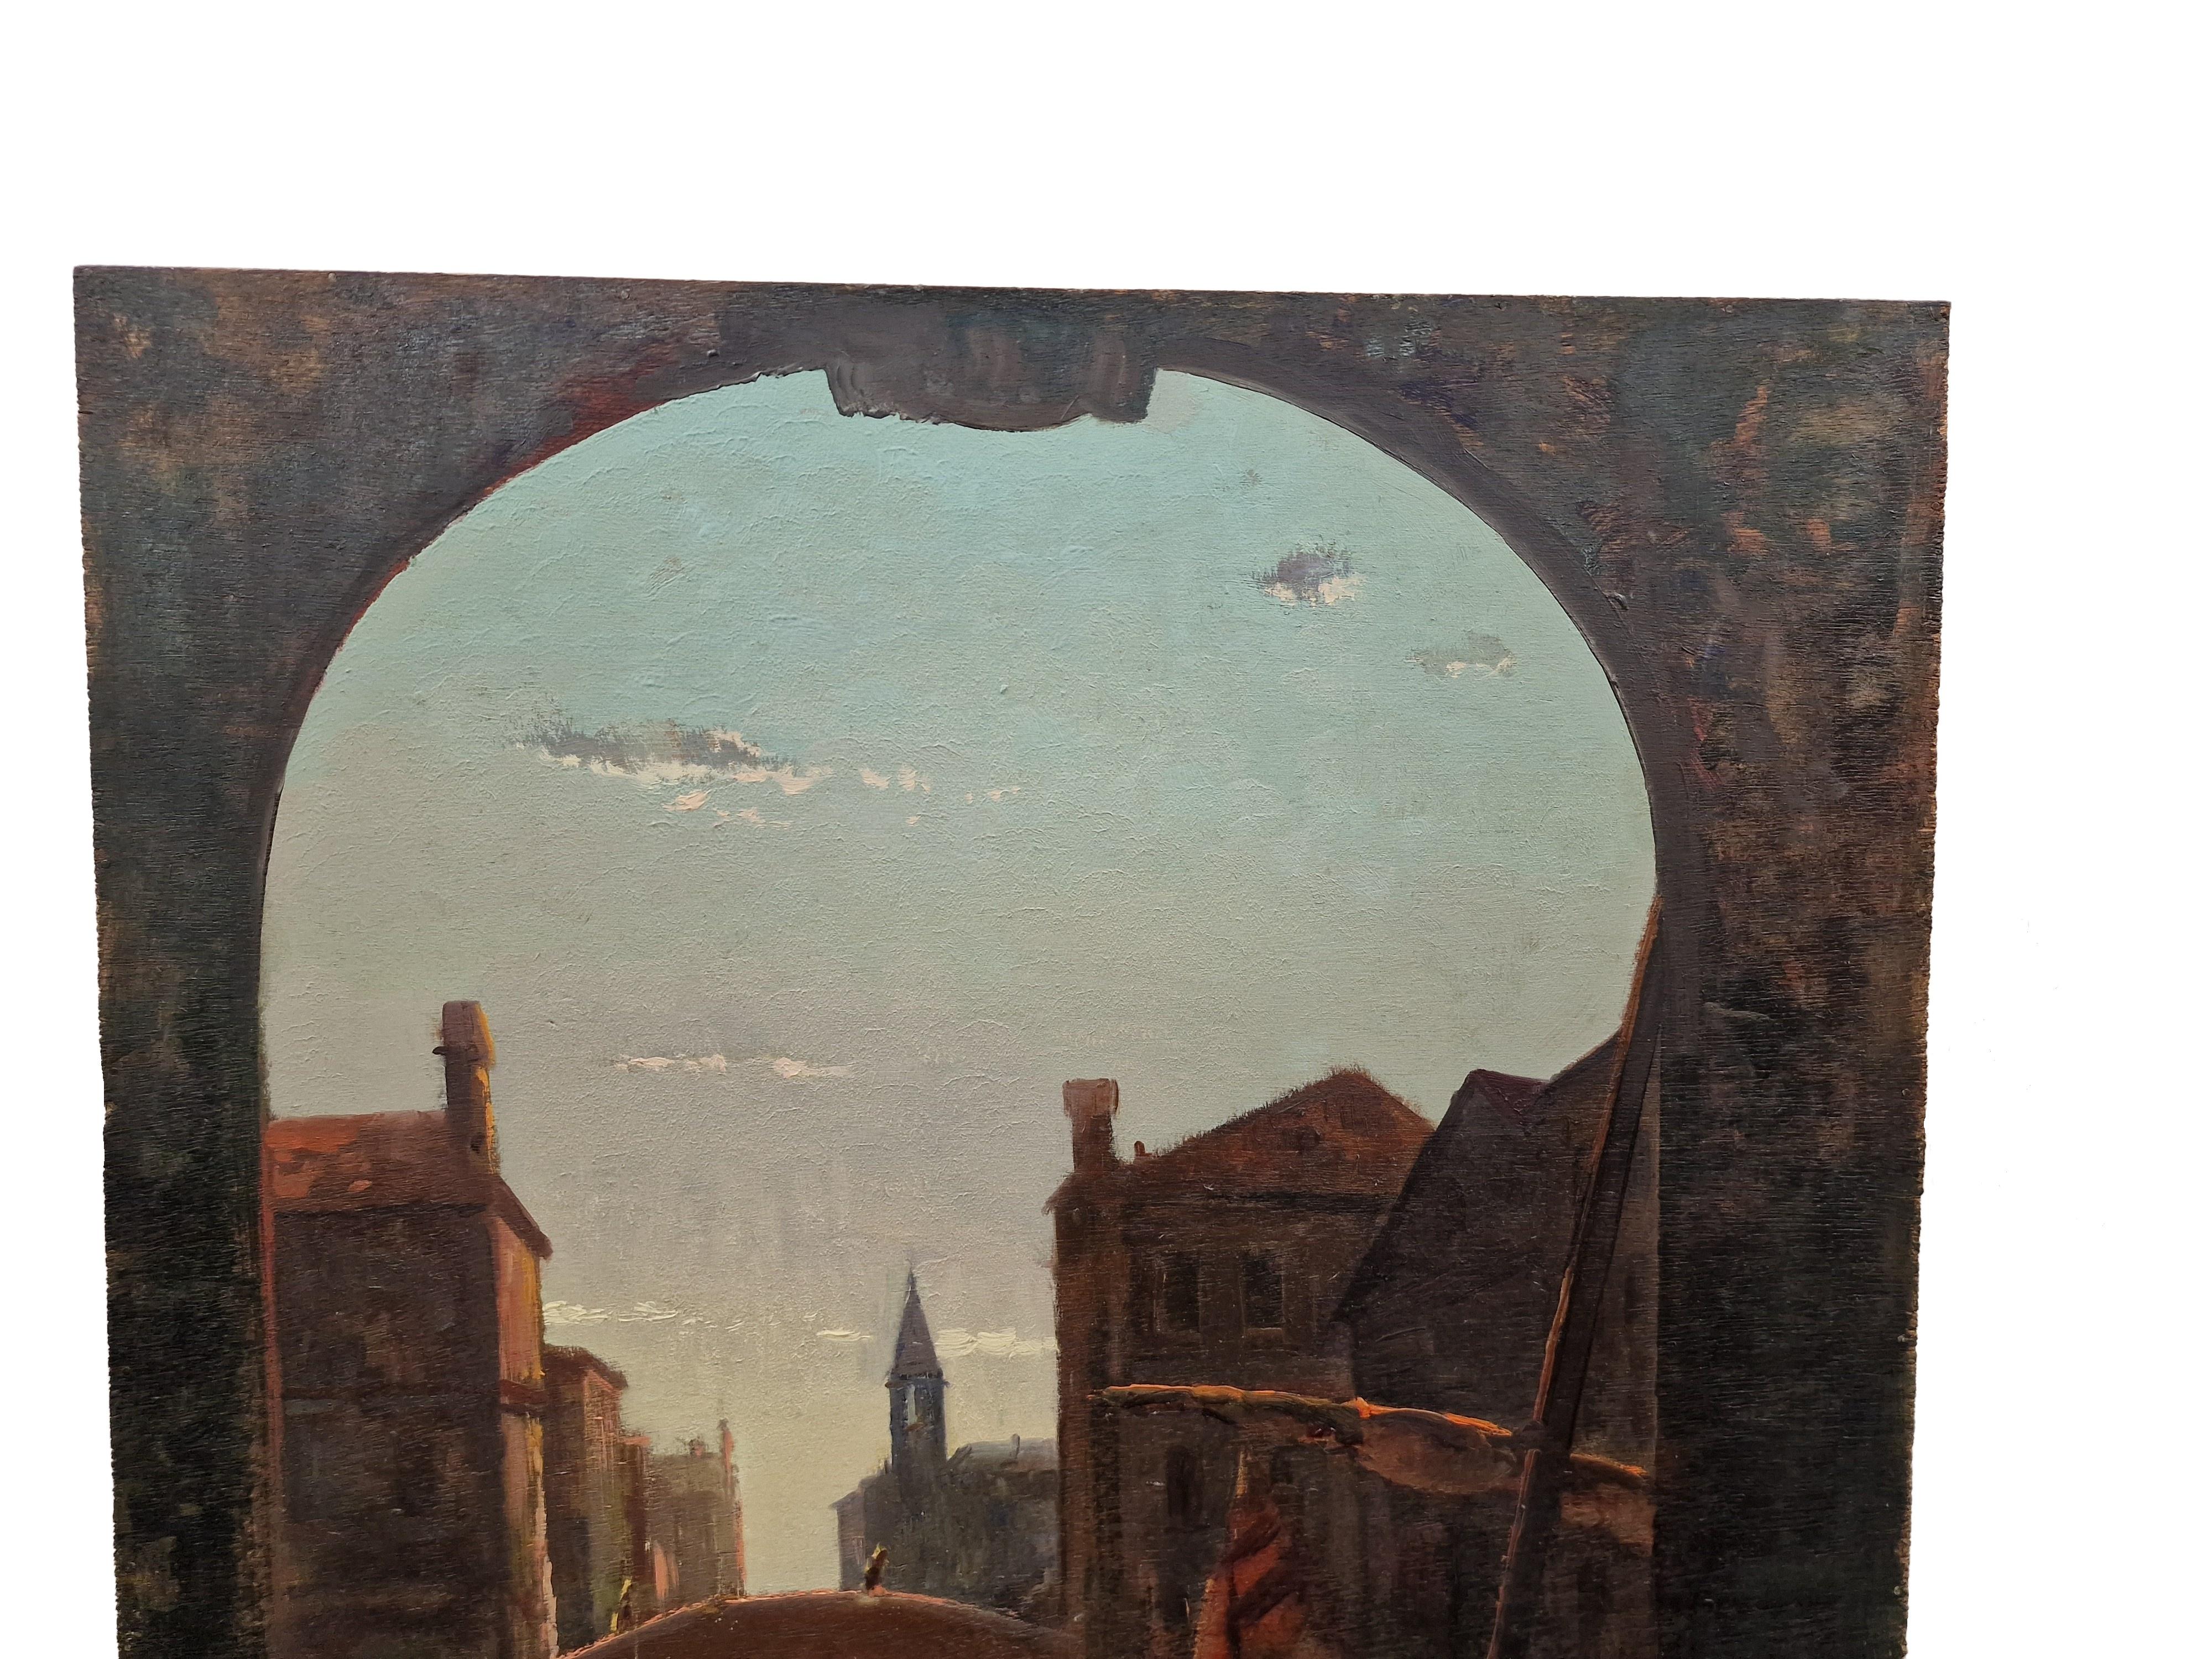 Large-format painting depicting a canal in Venice, signed A.M. Rossi, possibly attributable to Alberto Maria Rossi, an Italian artist who lived from 1879 to 1965.

The vertical format shows a beautiful perspective through an archway overlooking the